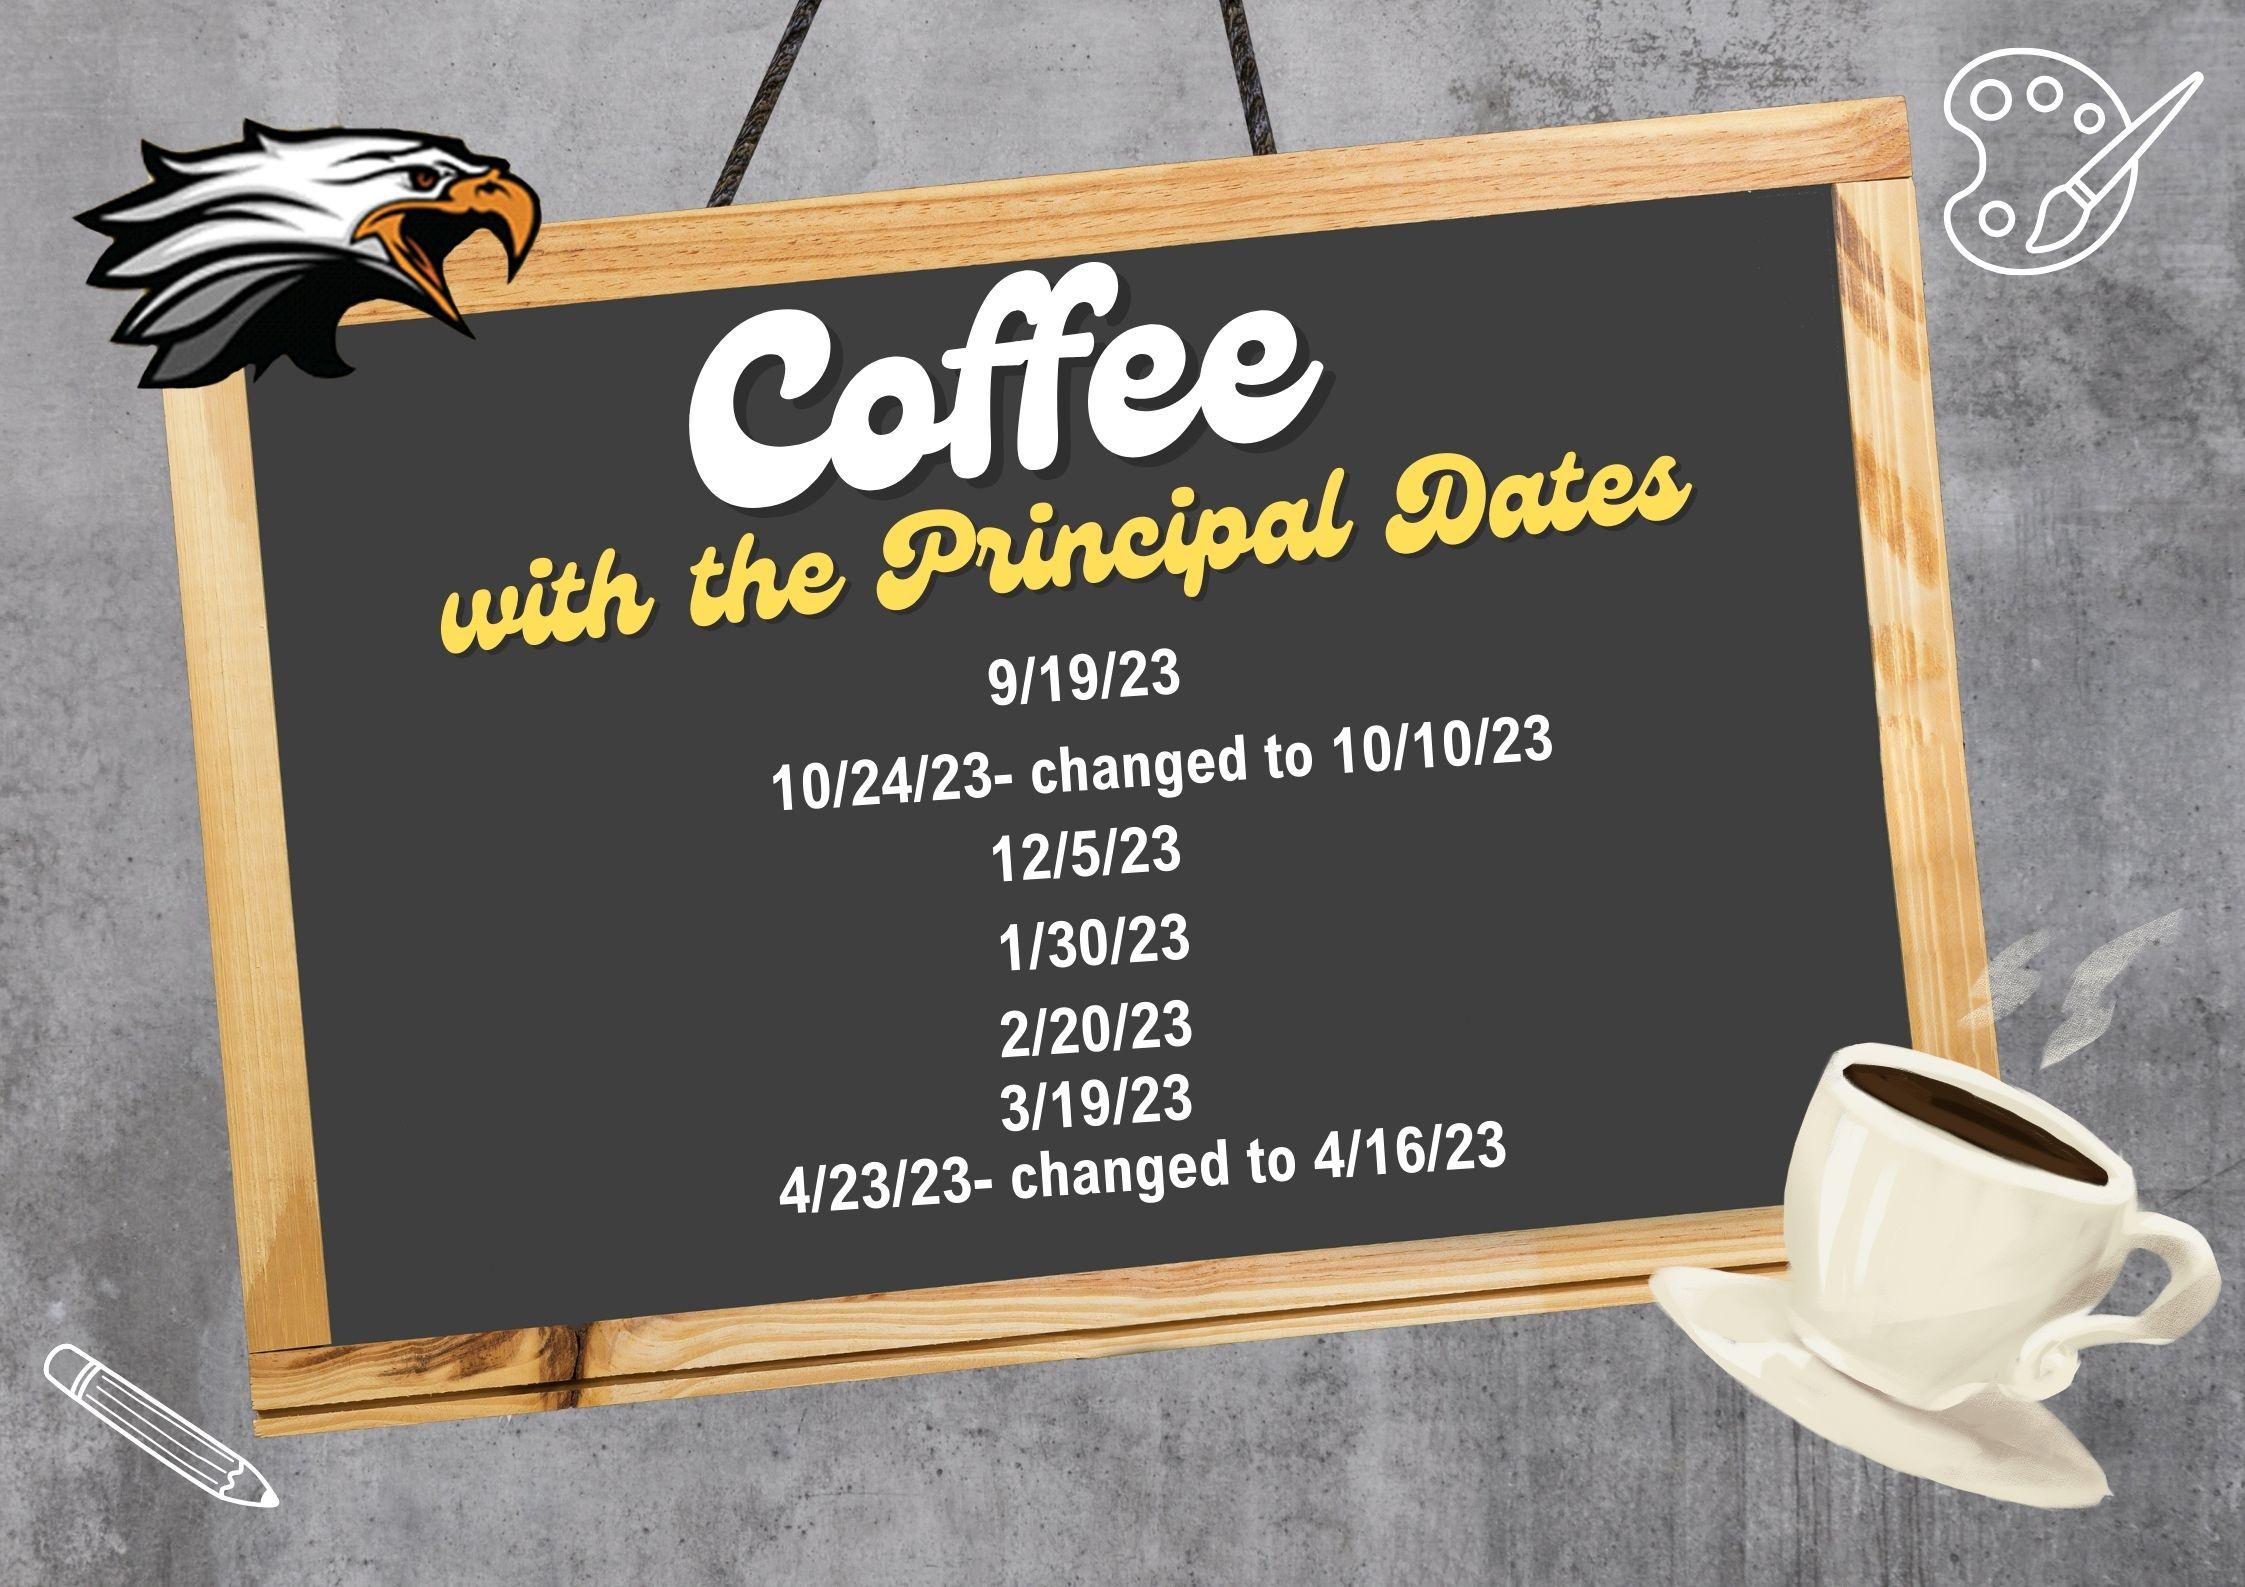 Alcott update to coffee with the principal dates 